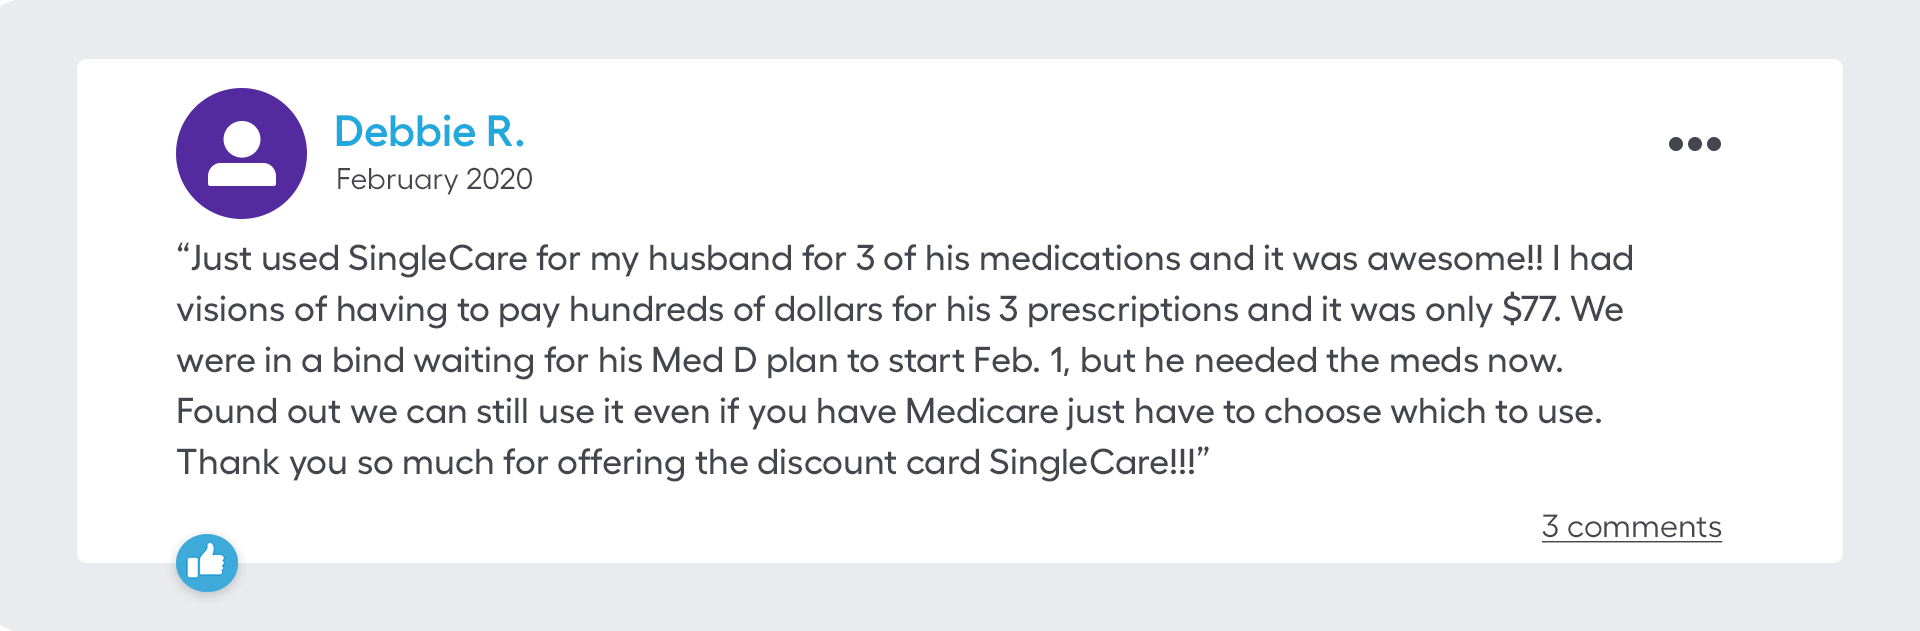 Just used SingleCare for my husband for 3 of his medications and it was awesome!! I had visions of having to pay hundreds of dollars for his 3 prescriptions and it was only $77. We were in a bind waiting for his Med D plan to start Feb. 1, but he needed the meds now. Found out we can still use it even if you have Medicare just have to choose which to use. Thank you so much for offering the discount card SingleCare!!